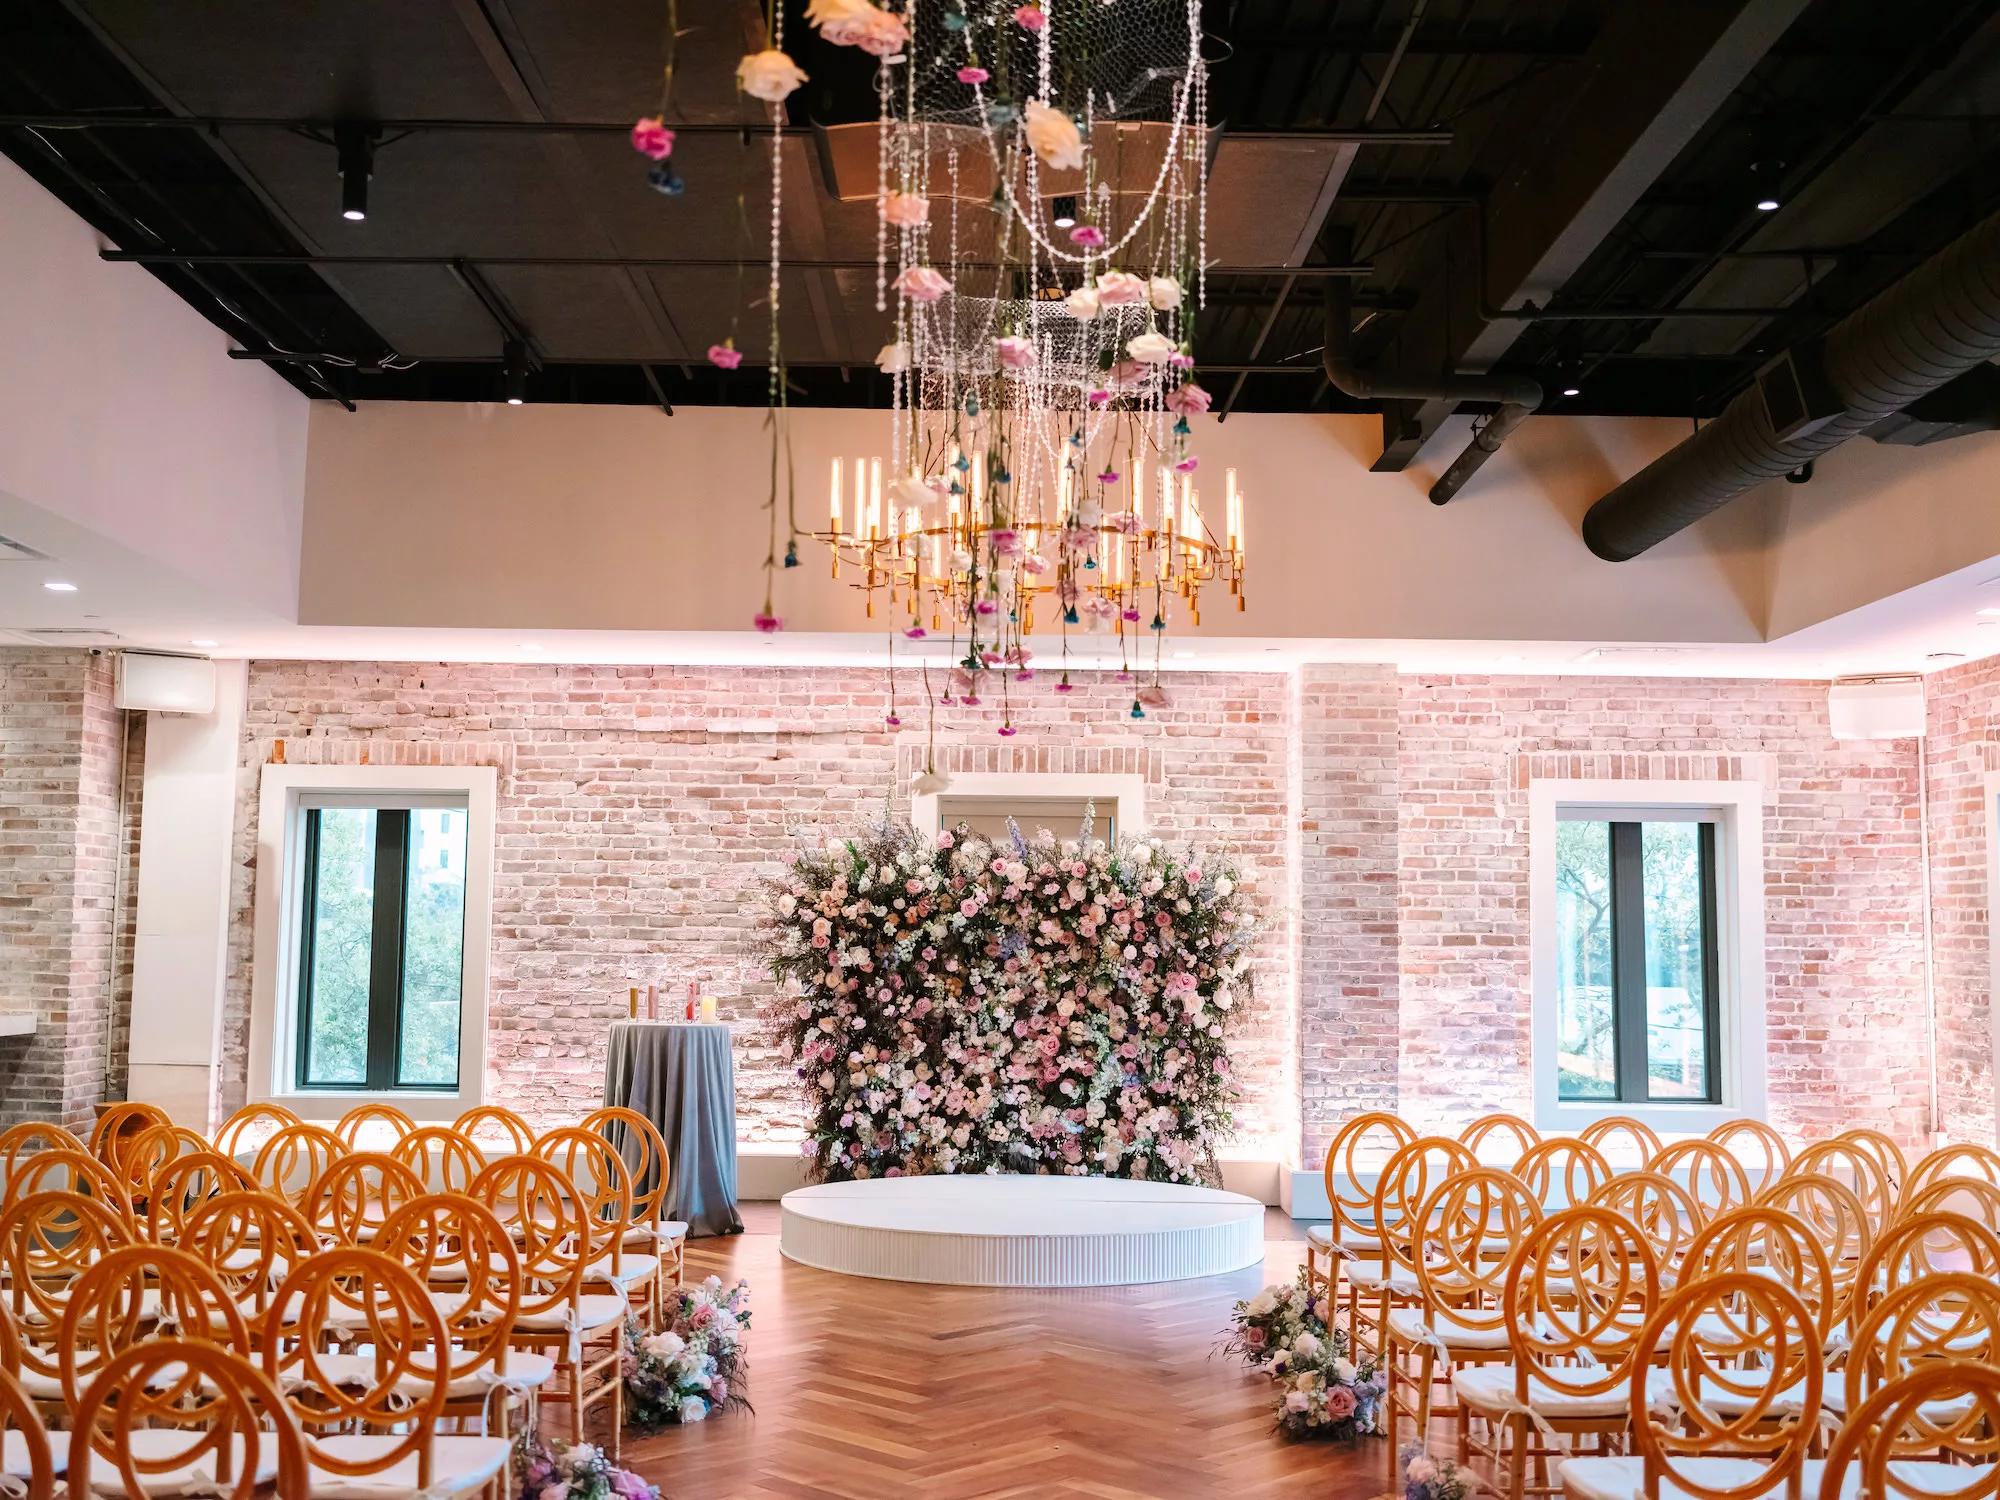 Whimcial Pink and Blue Wedding Ceremony Ideas | Pink Roses, White Hydrangeas, Blue Stock Flowers, and Greenery Backdrop Inspiration | St Pete Venue Red Mesa Events | Planner Wilder Mind Events